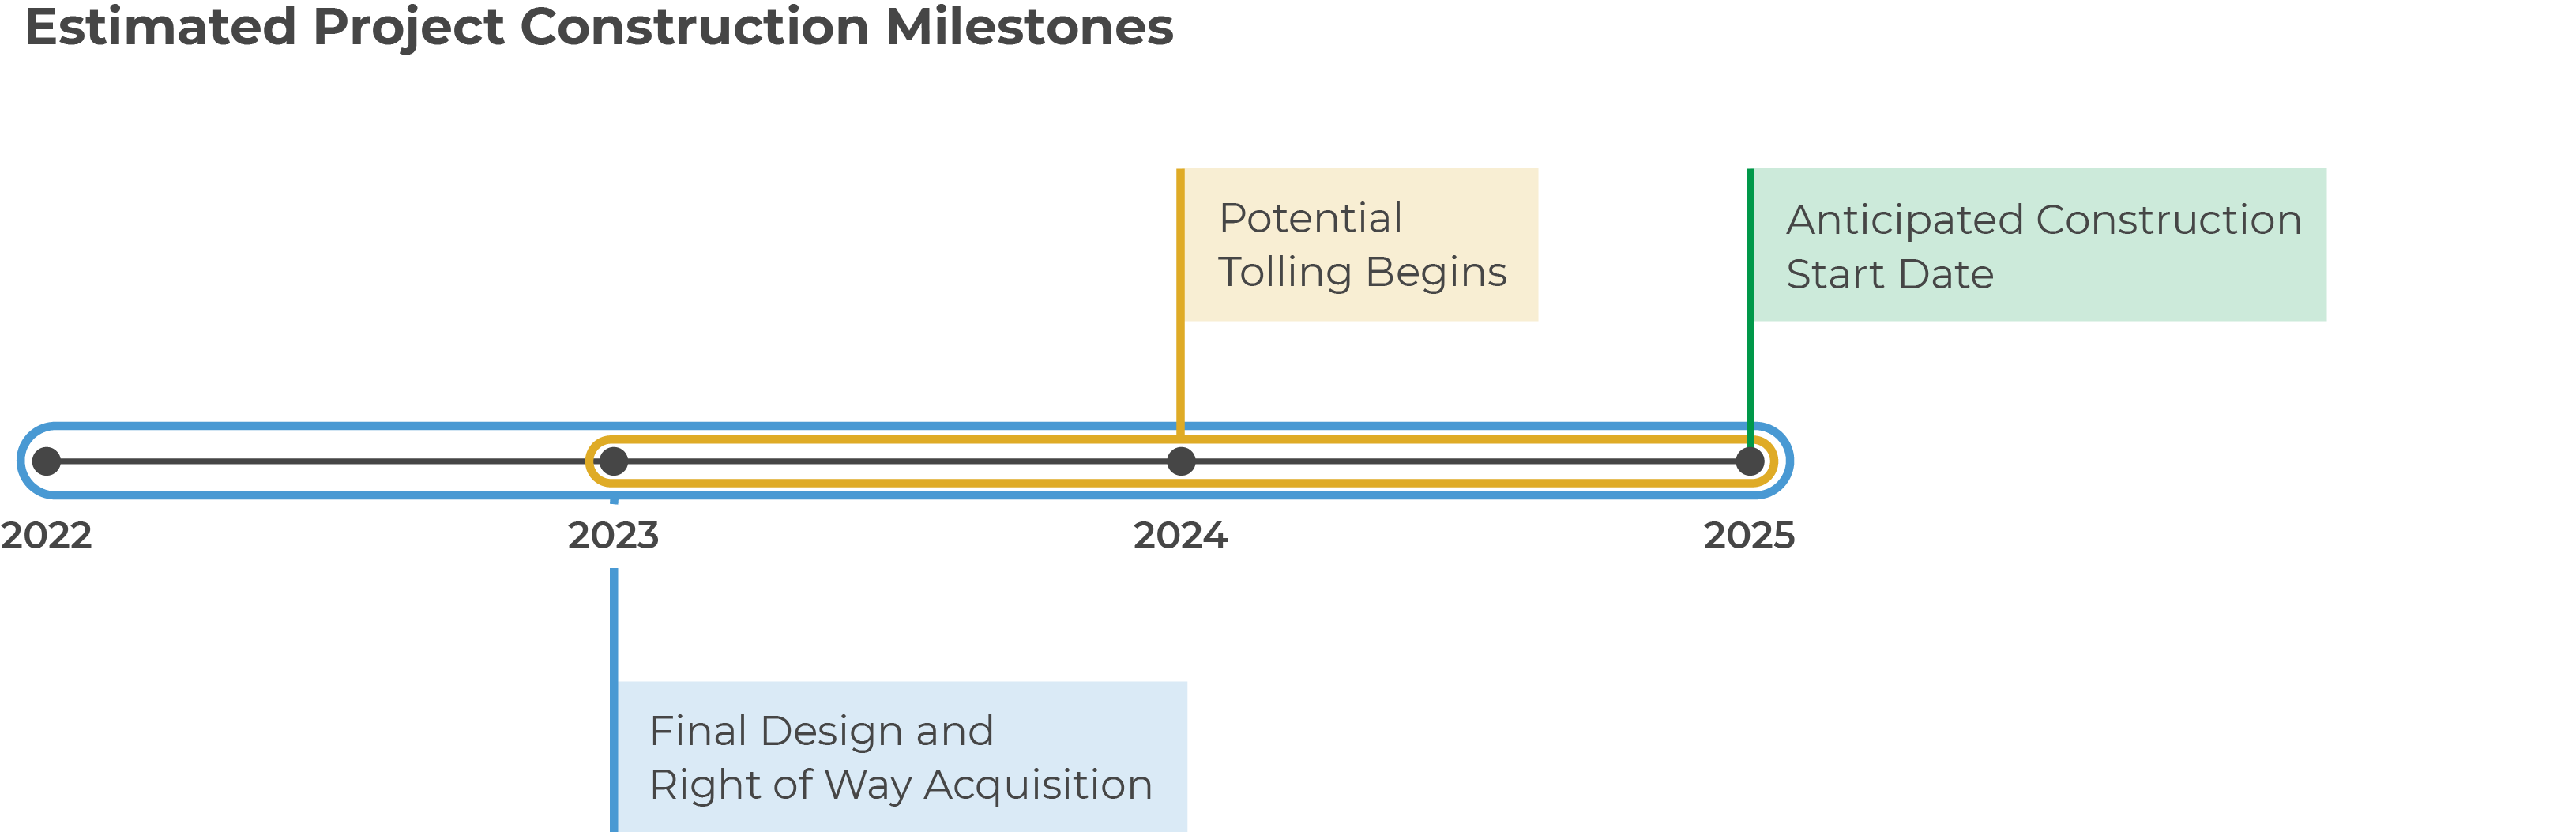 Timeline depicting final designa nd right of way from 2022-2025, potential tolling begins 2023-2025, and anticipated construction start date in 2025.